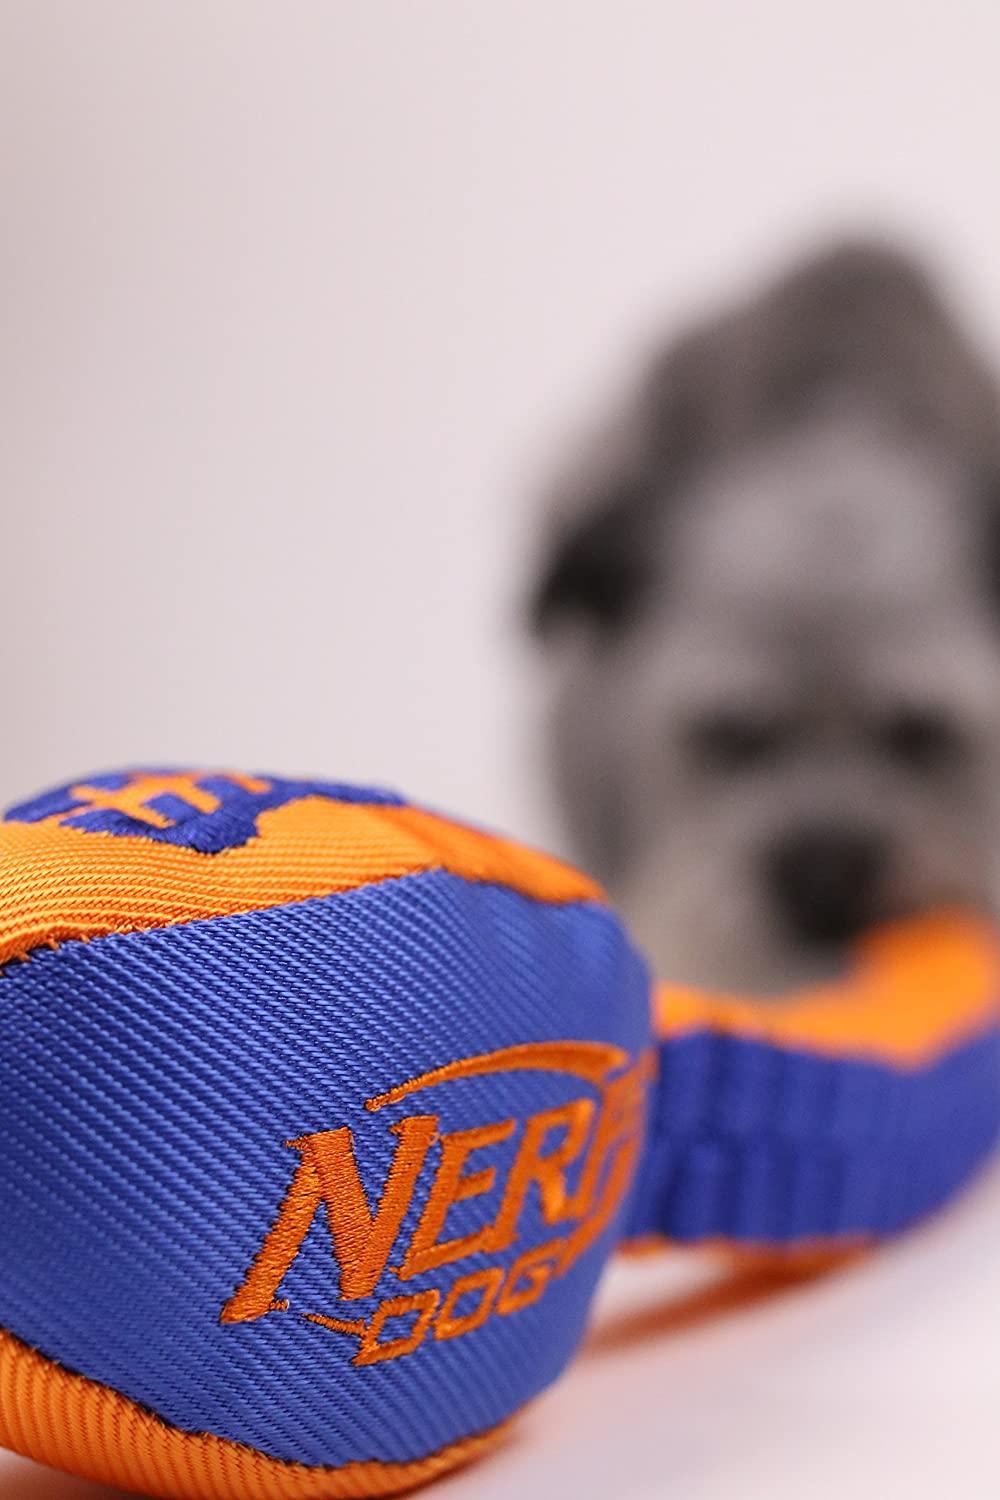 Nerf Dog Durable Toy Gifts Made